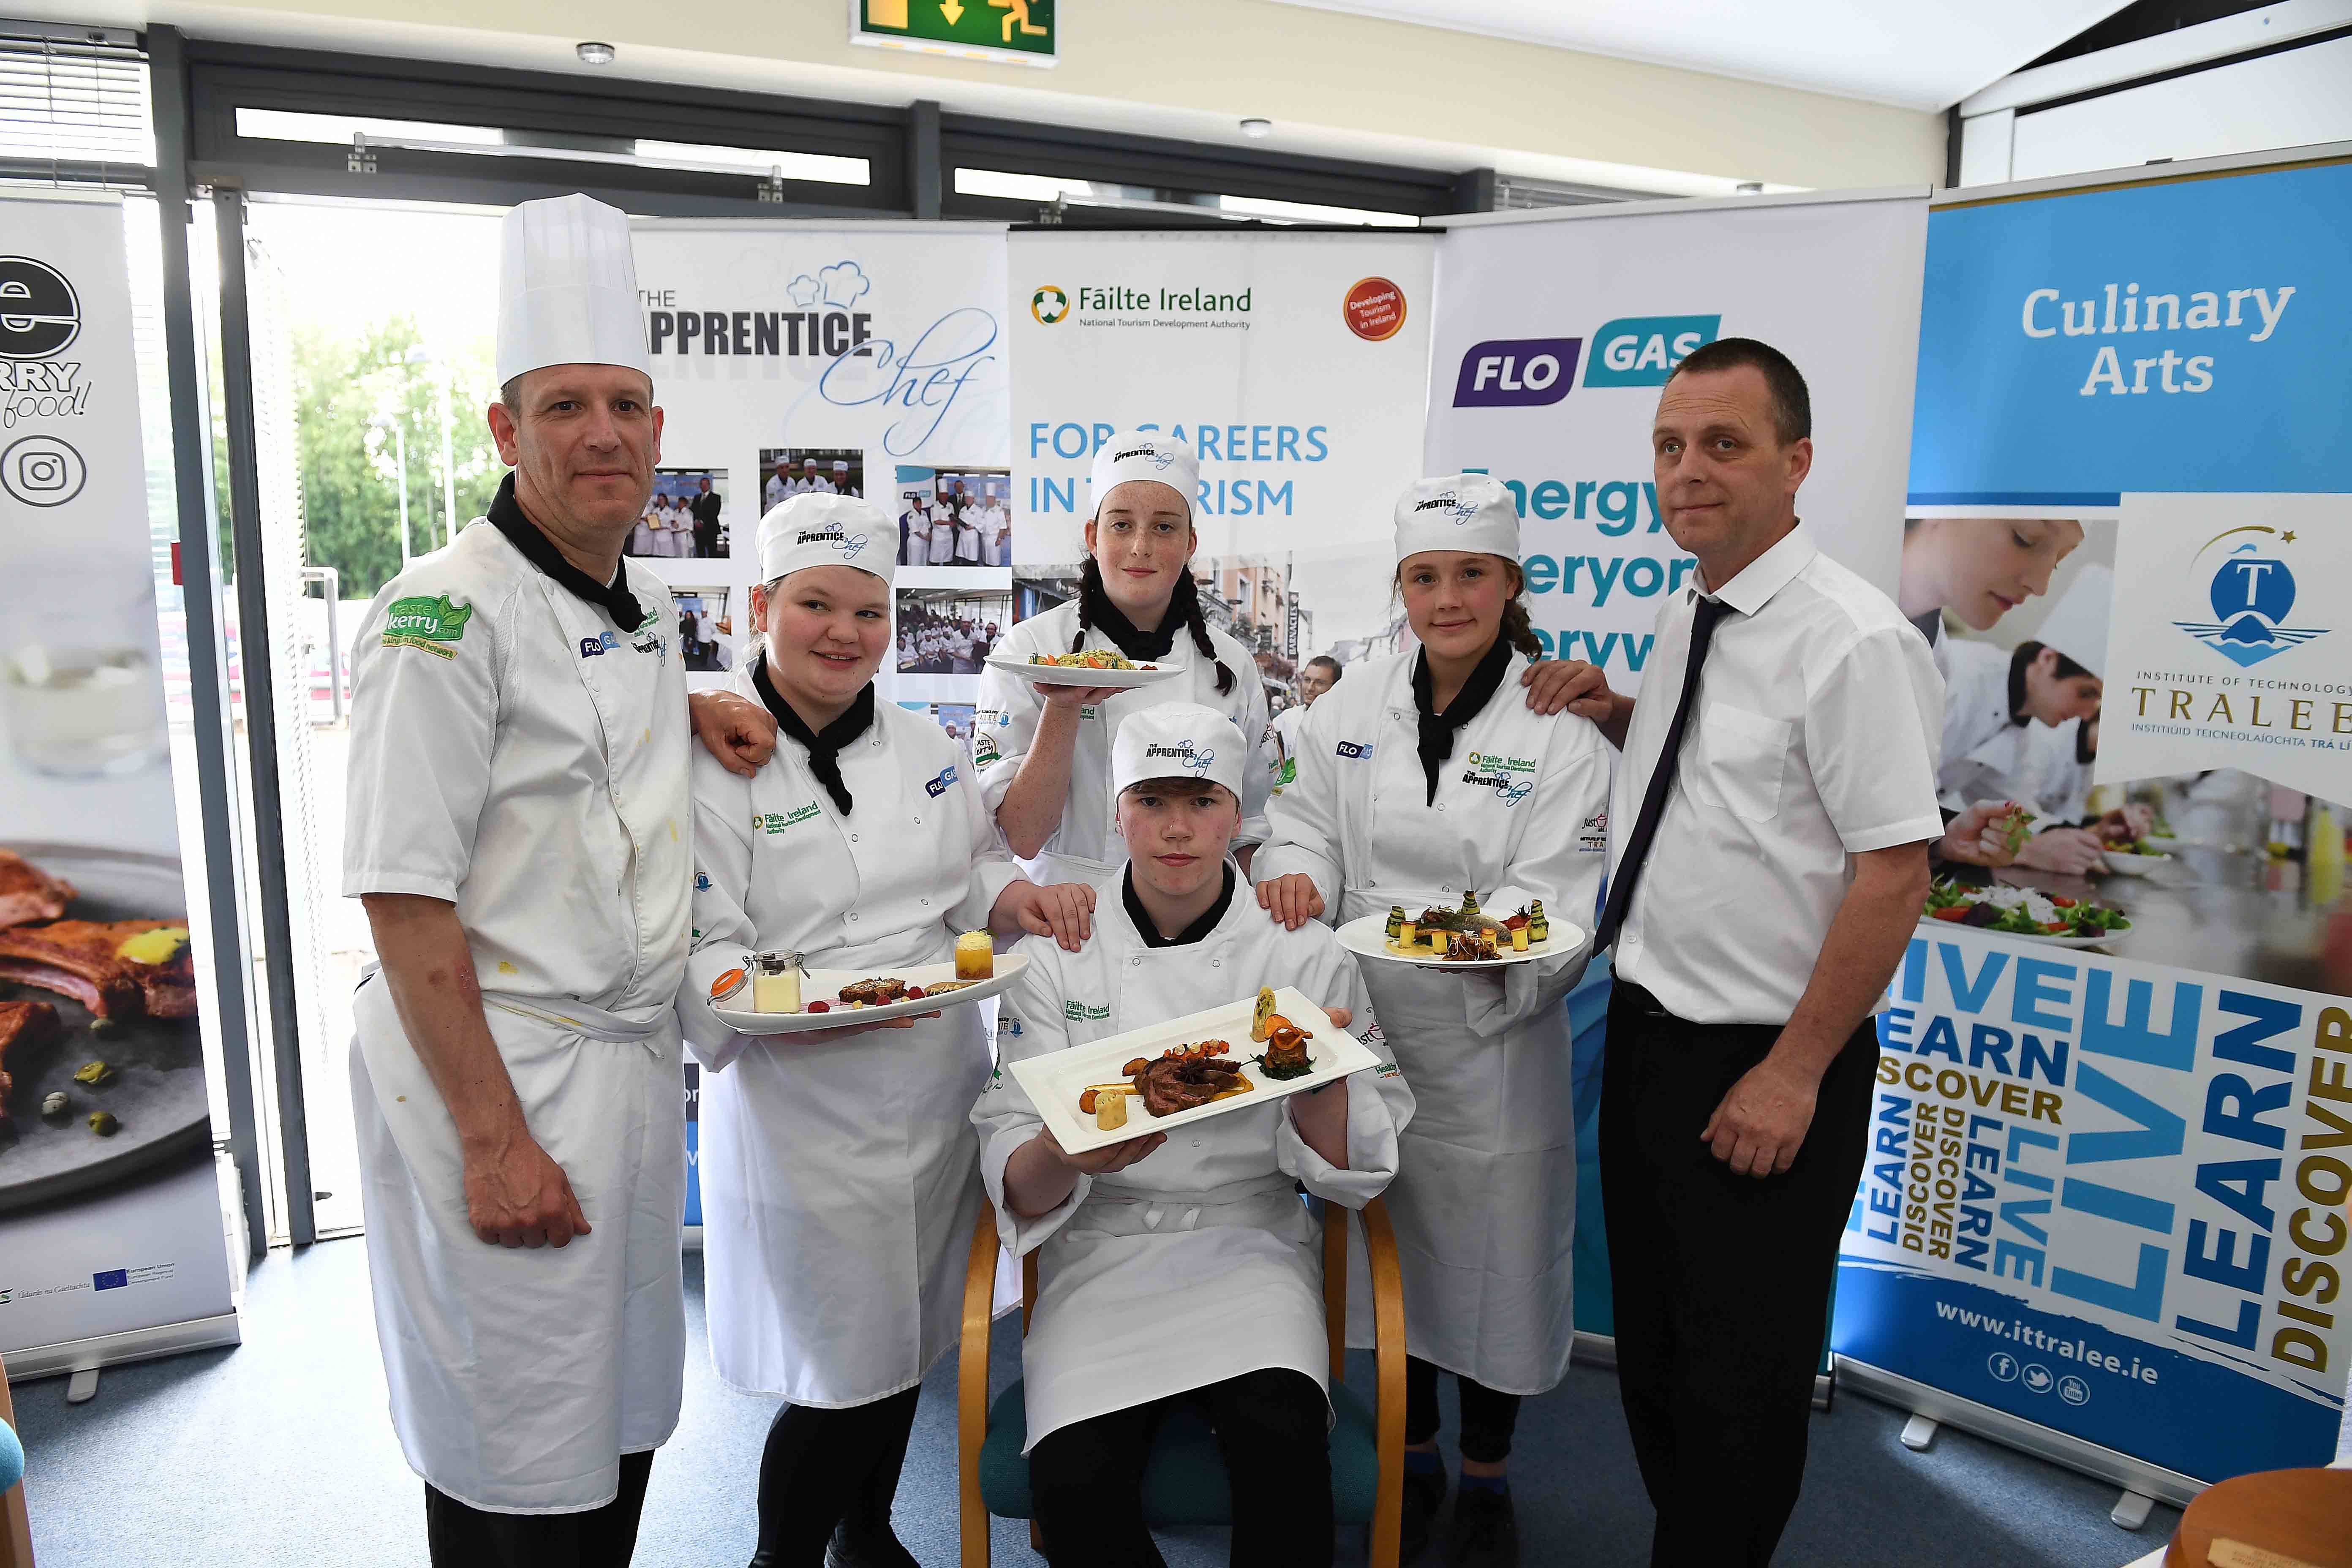 Caption: Mark Doe of Just Cooking, co-founder of the Schools Apprentice Chef programme (left) with Mike Murphy, Flogas sales representative (right) and L/R - Kelly English from Midleton 3rd, winner Padraic Randles from Kenmare, the 2017 Supreme Apprentice Chef, Lauren Wall from Co Waterford and Emily O'Hara from Midleton. joint 2nd